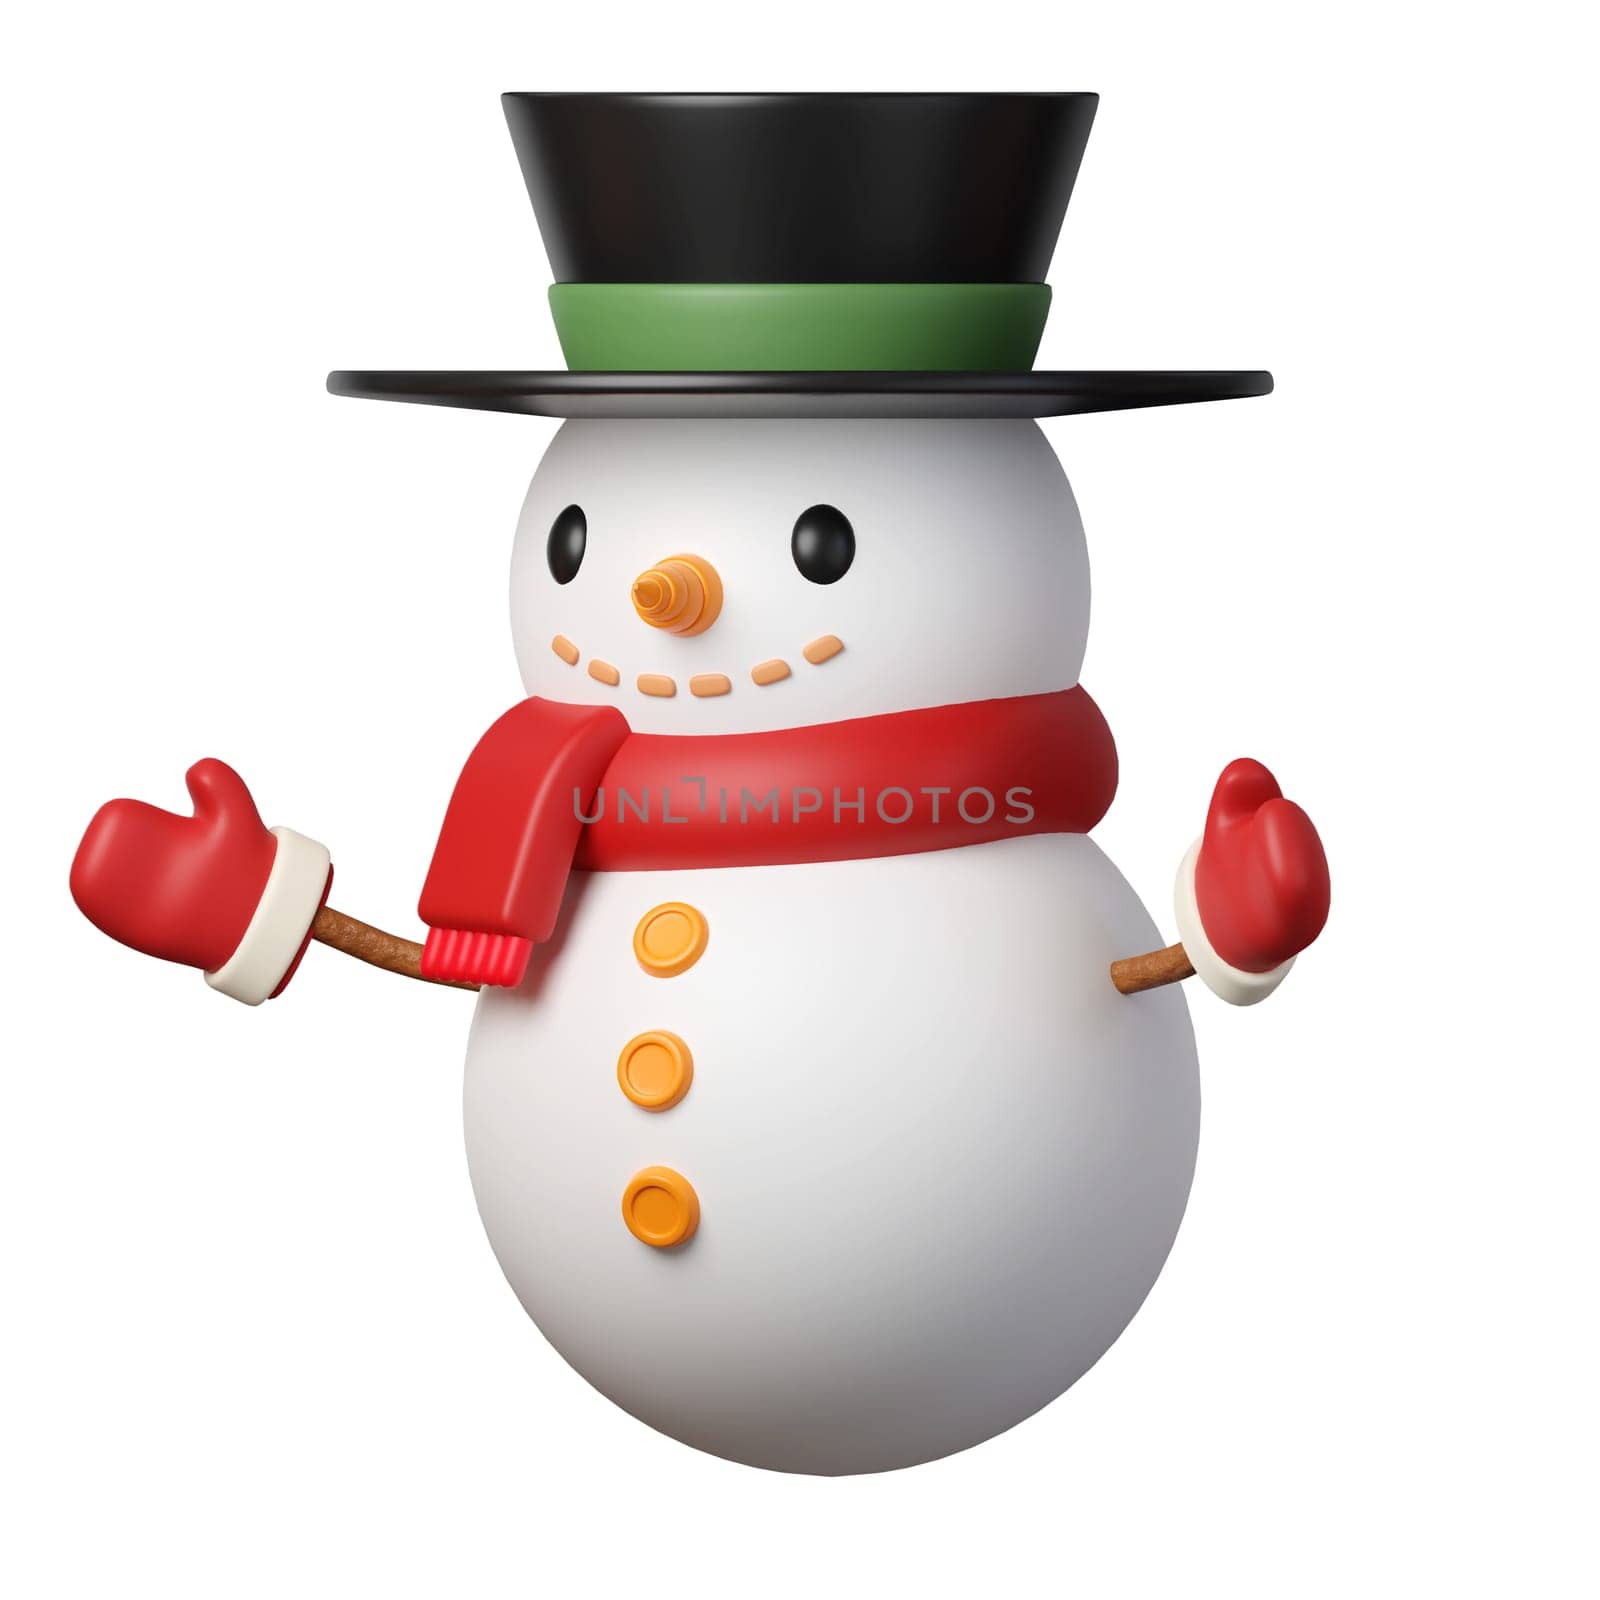 3d Christmas Snowman icon. minimal decorative festive conical shape tree. New Year's holiday decor. 3d design element In cartoon style. Icon isolated on white background. 3d illustration by meepiangraphic